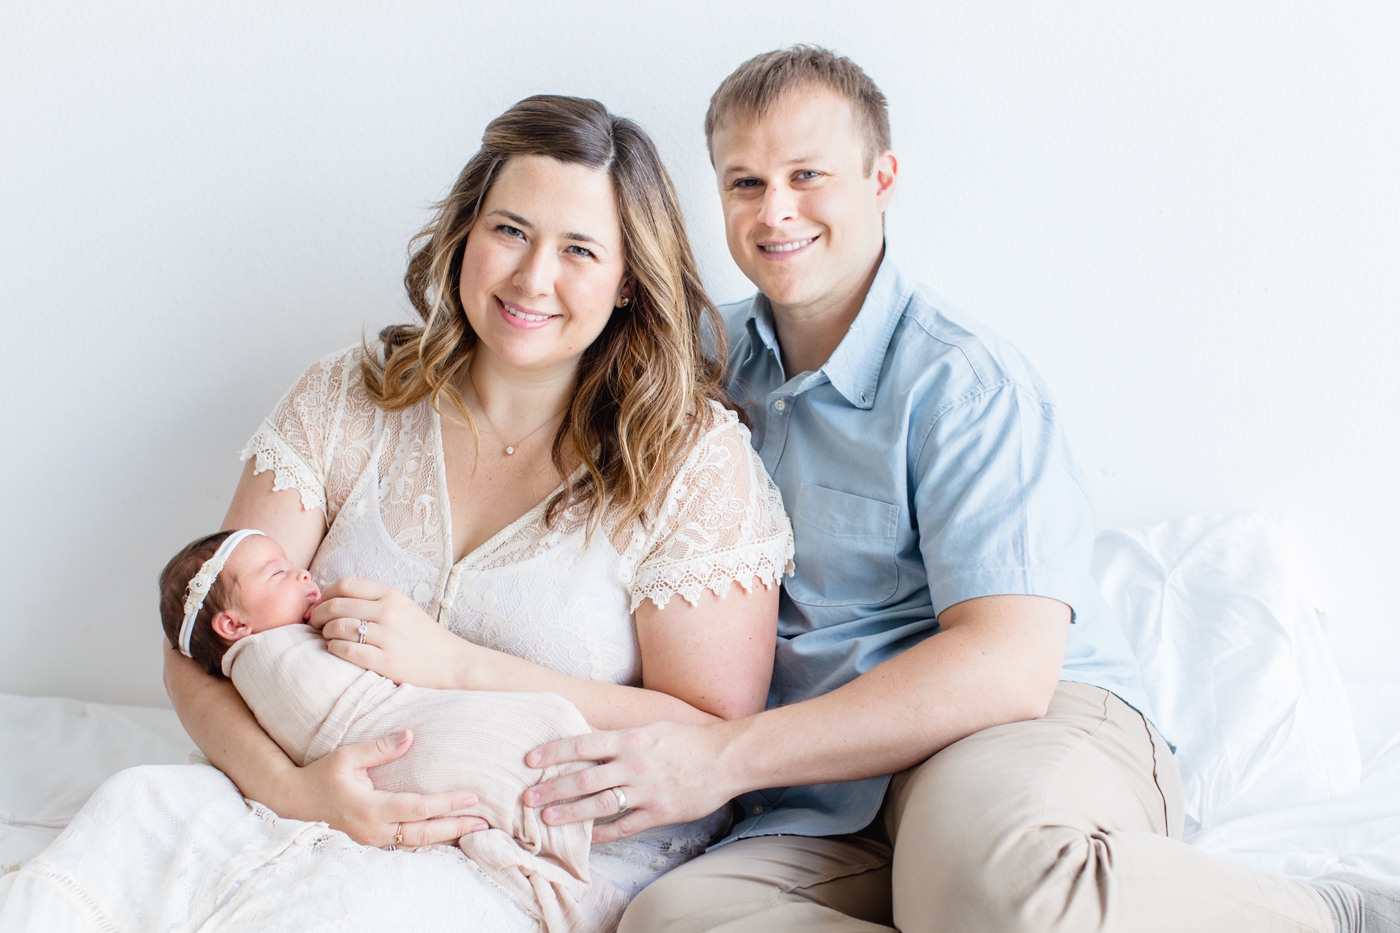 New parents sitting on bed while holding baby. Photo by Sana Ahmed Photography.